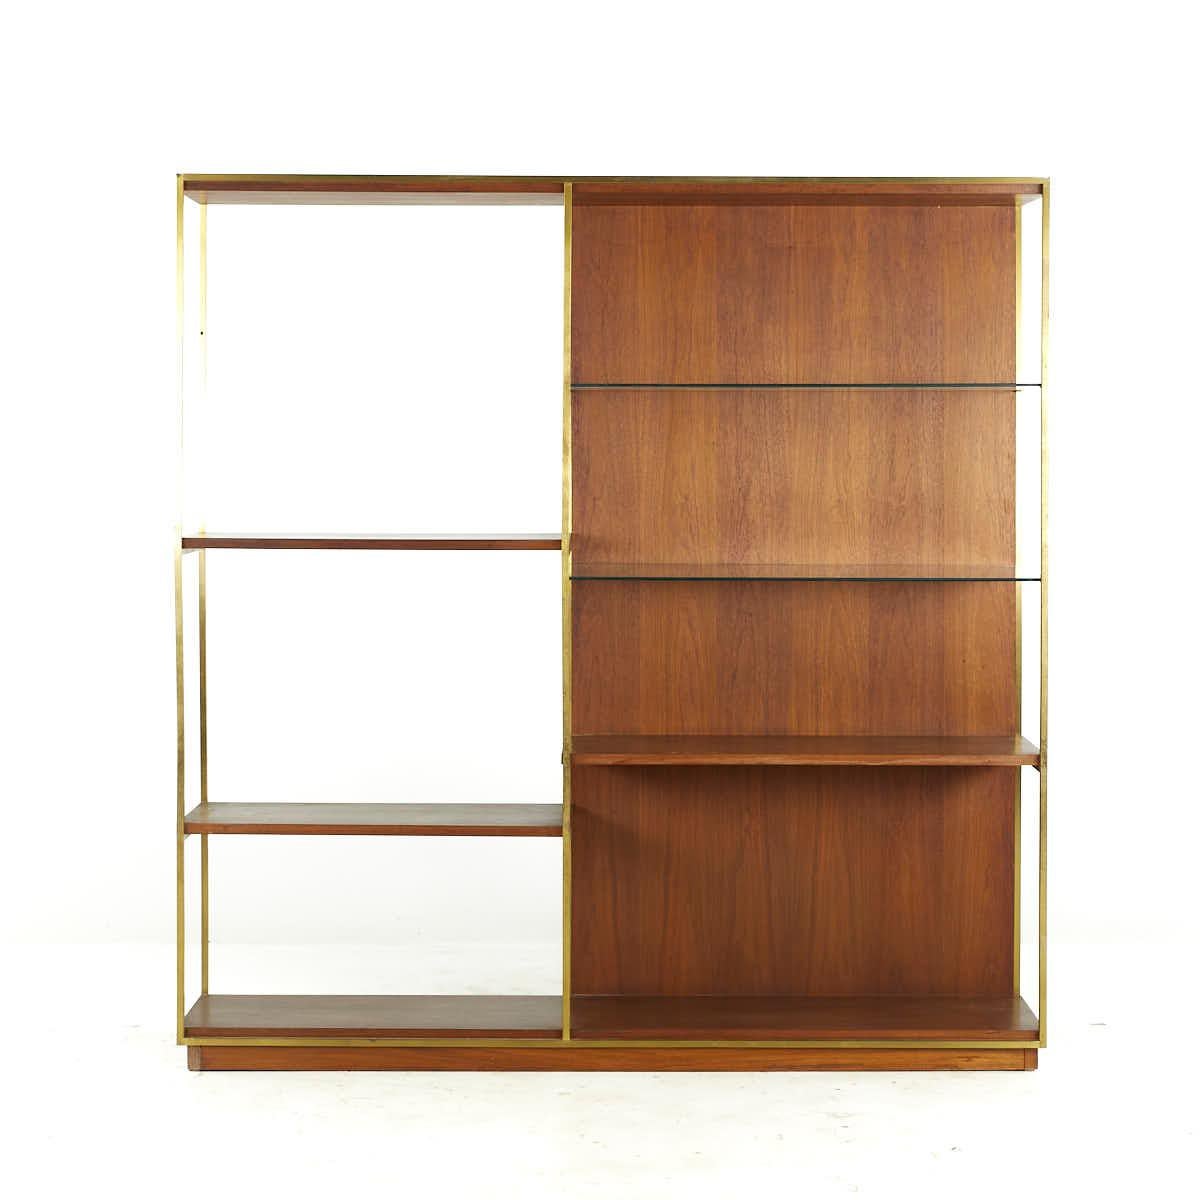 Harvey Probber midcentury Walnut and Brass Etagere Shelf

This etagere measures: 60 wide x 13 deep x 62 inches high

All pieces of furniture can be had in what we call restored vintage condition. That means the piece is restored upon purchase so